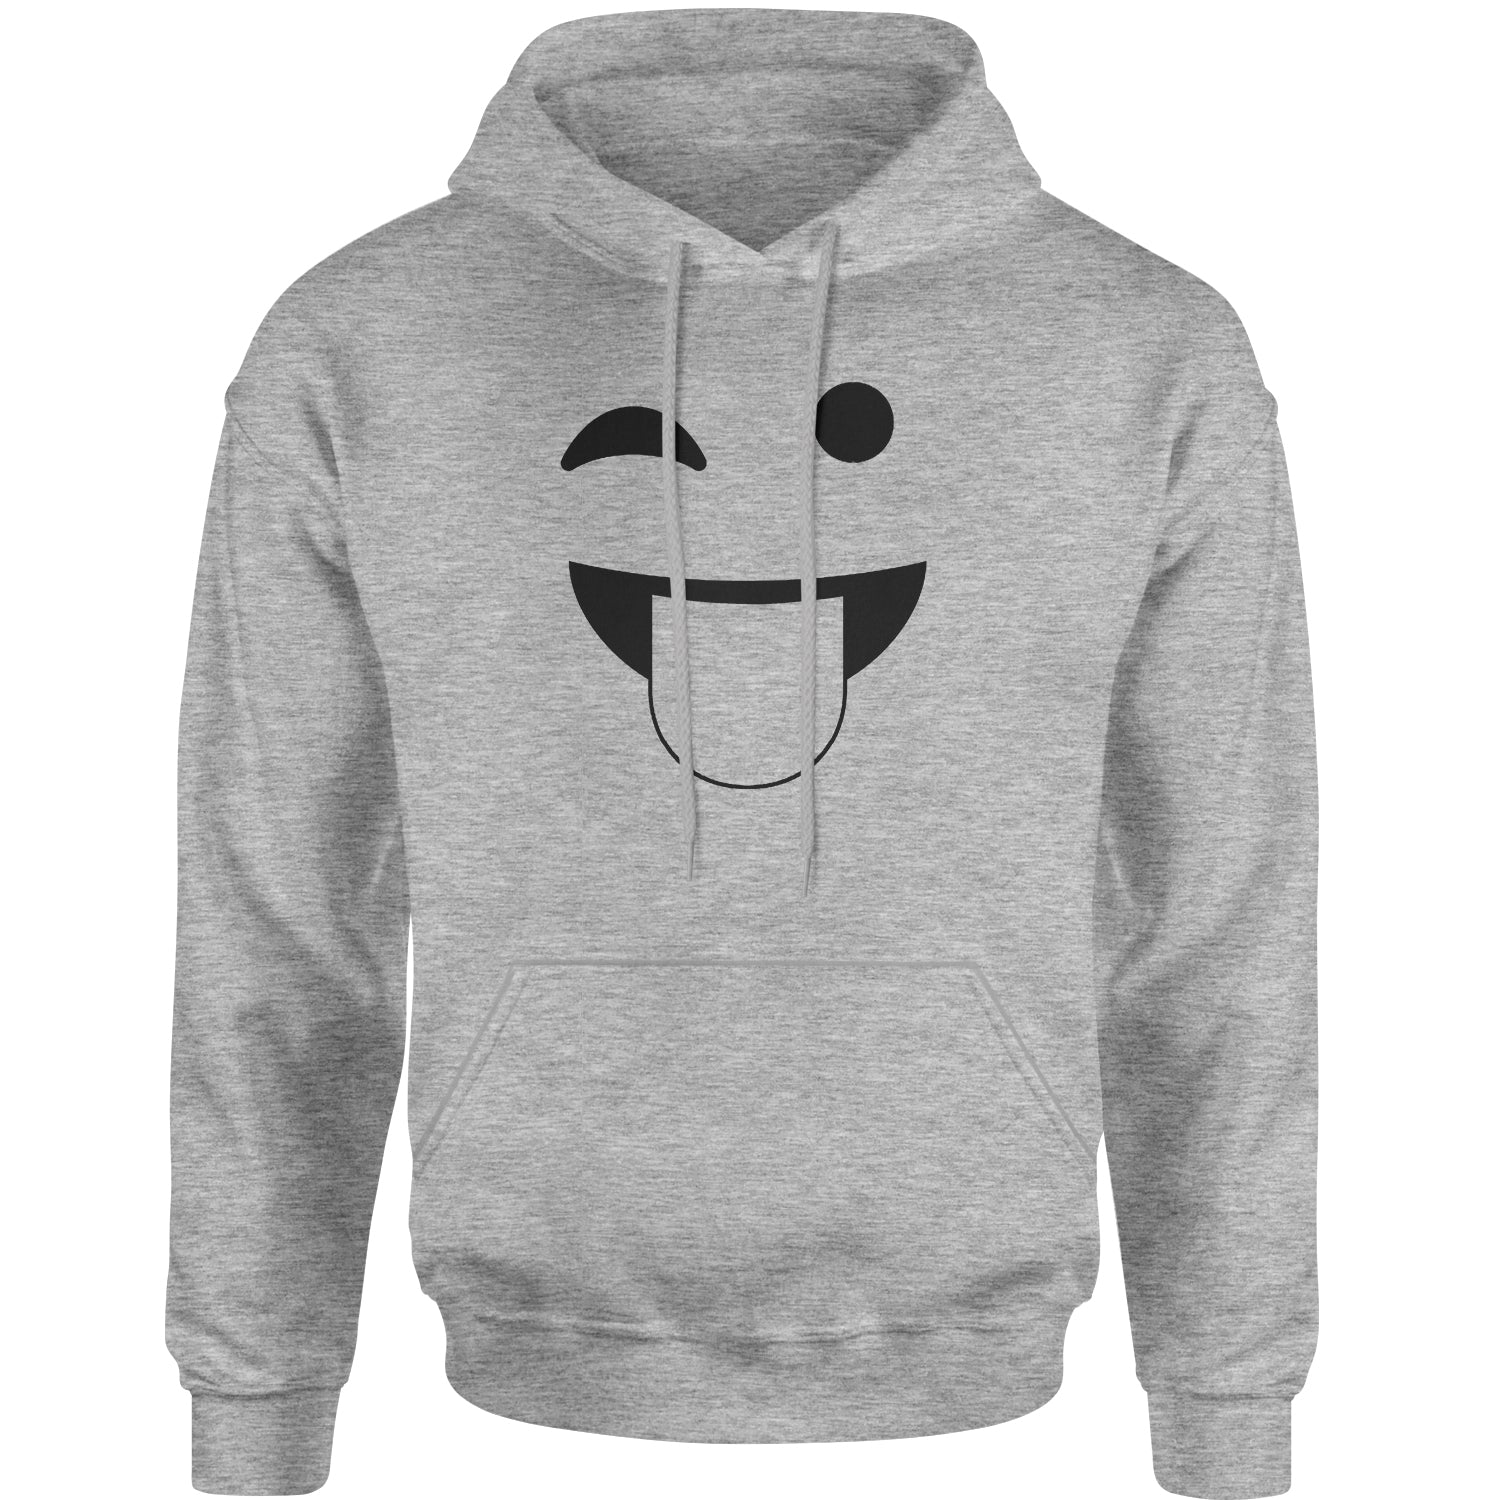 Emoticon Tongue Hanging Out Smile Face Adult Hoodie Sweatshirt cosplay, costume, dress, emoji, emote, face, halloween, smiley, up, yellow by Expression Tees